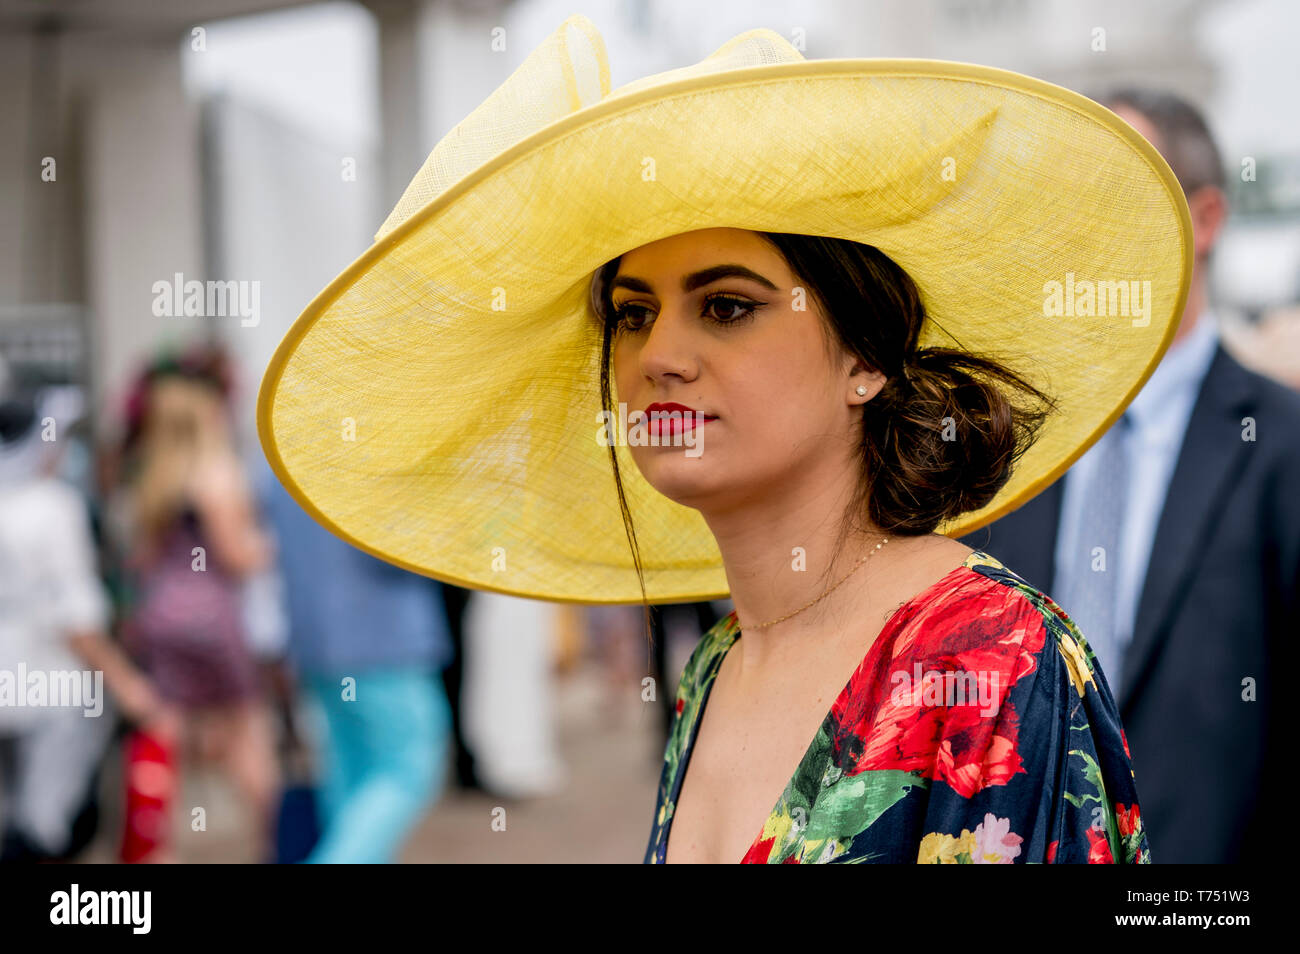 Louisville, KY, USA. 4th May, 2019. May 4, 2019 : Scenes from Kentucky Derby Day at Churchill Downs on May 4, 2019 in Louisville, Kentucky. Scott Serio/Eclipse Sportswire/CSM/Alamy Live News Stock Photo